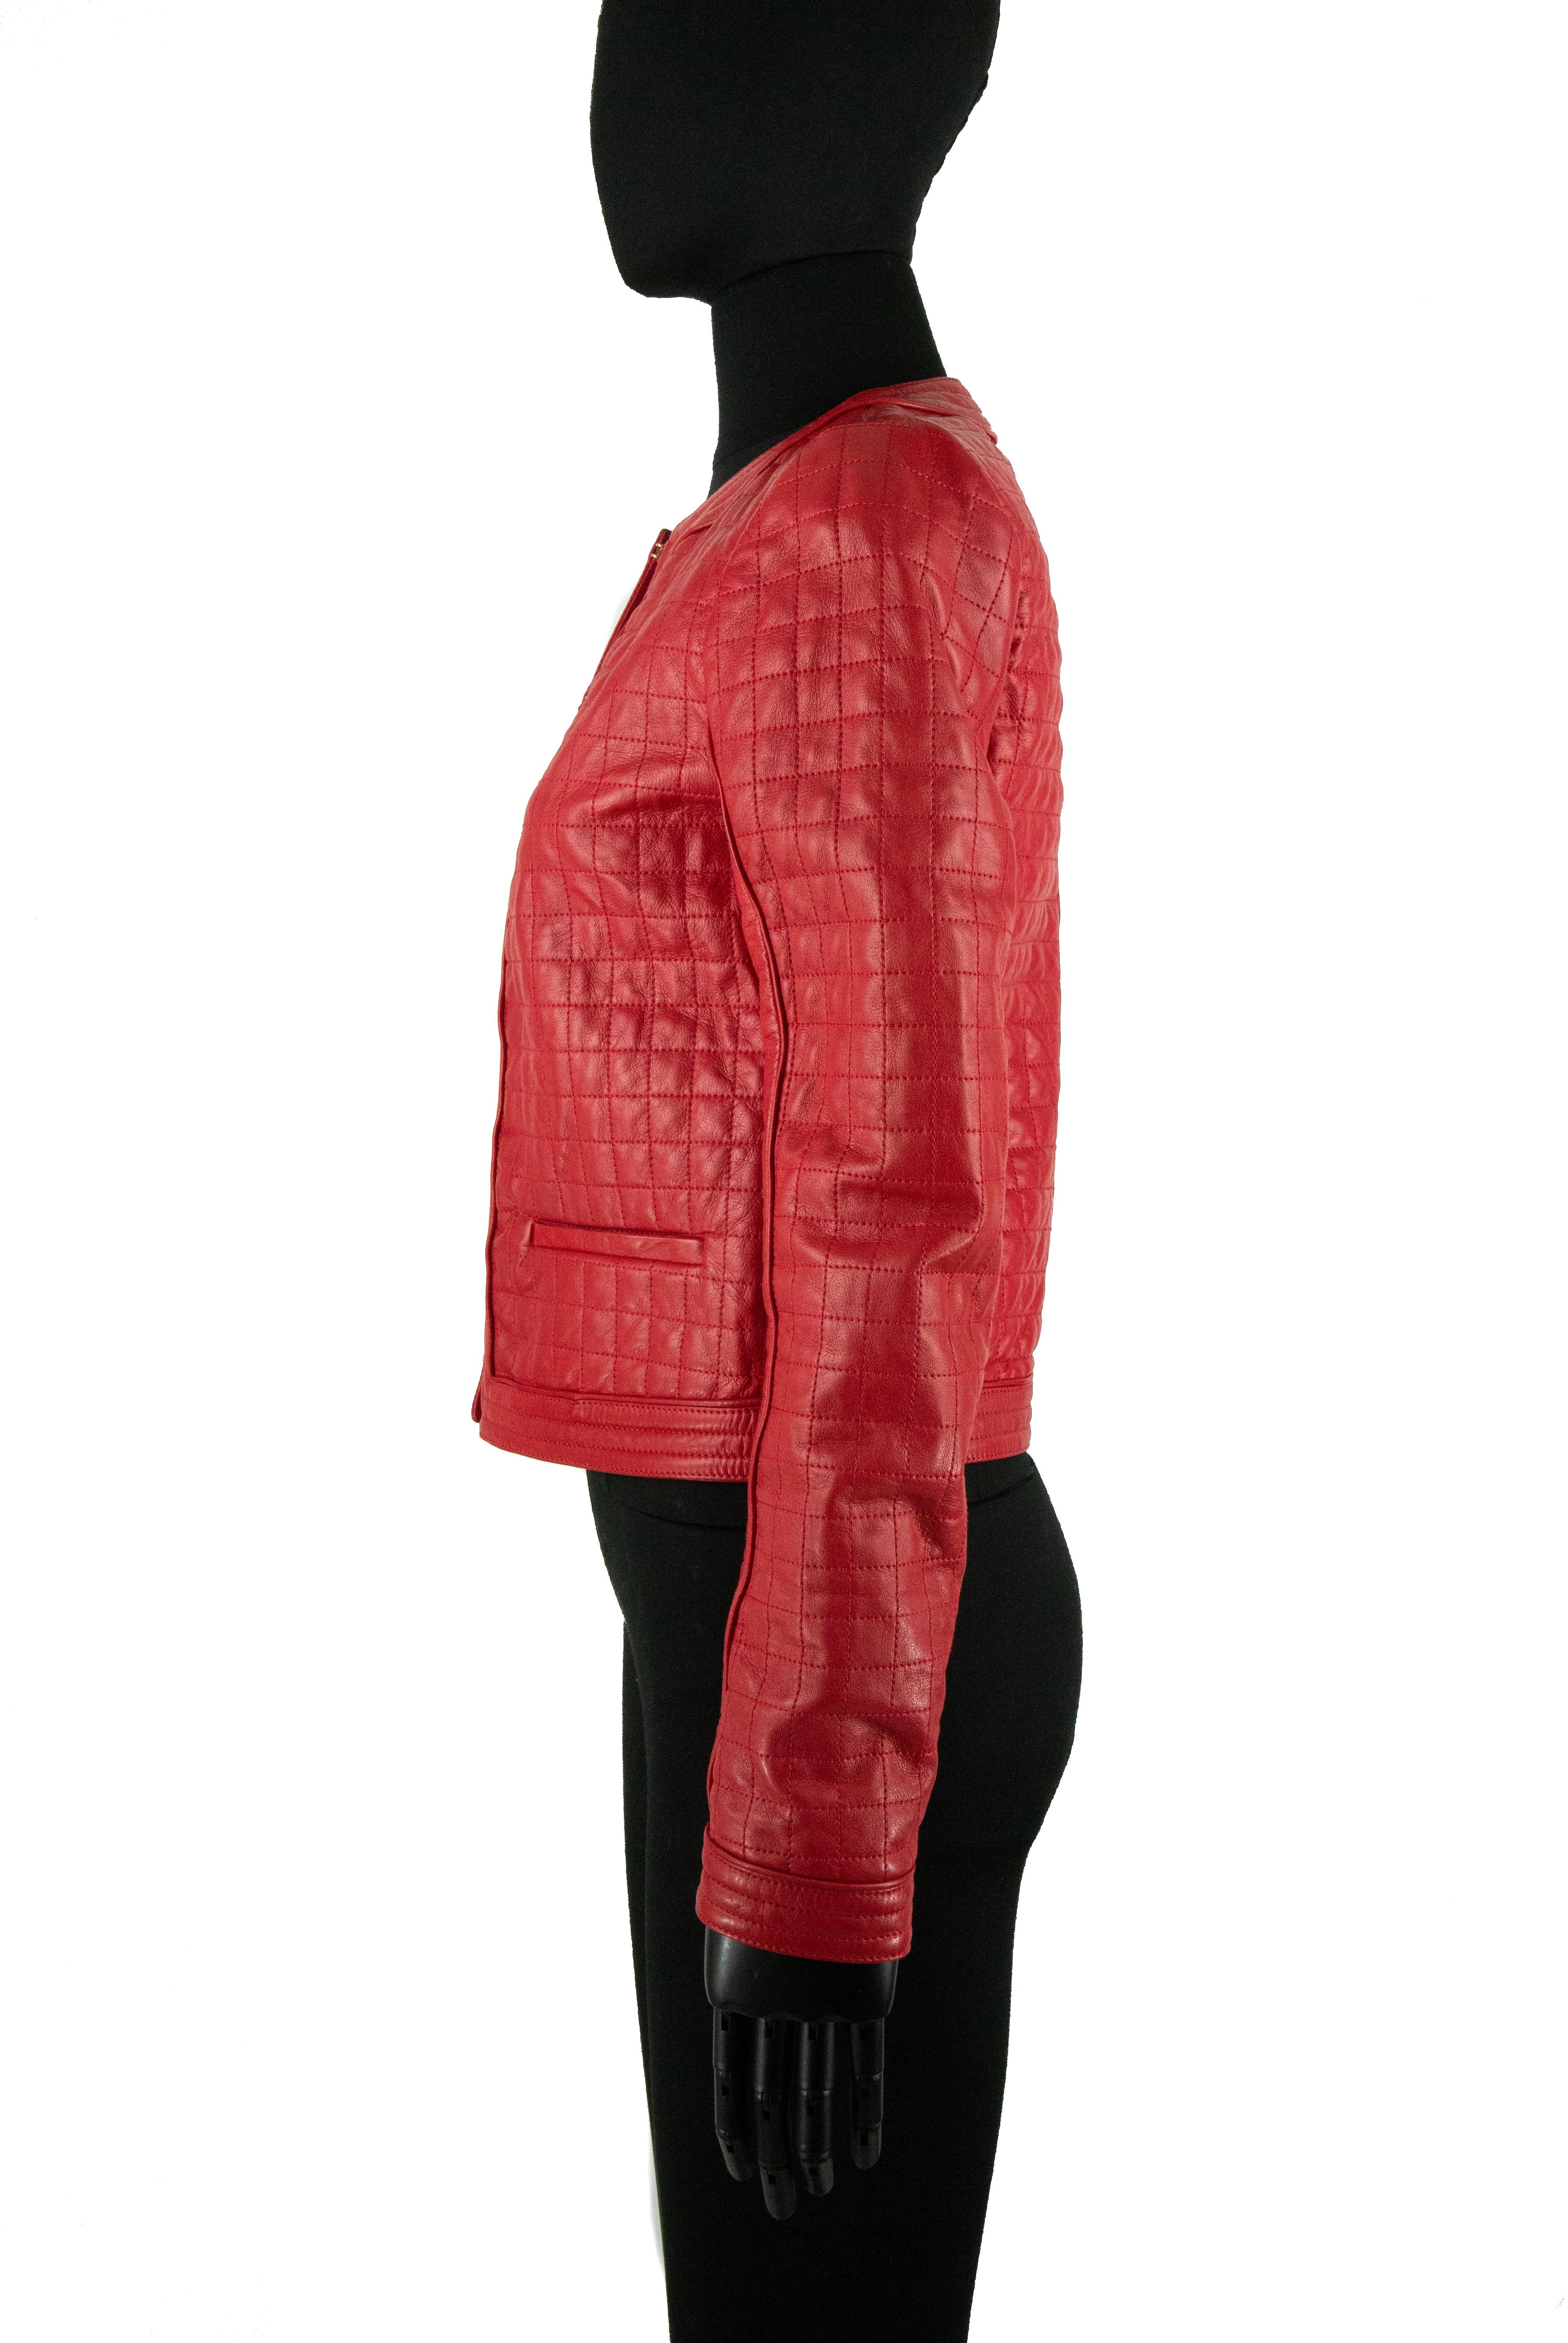 A red Roberto Cavalli leather jacket with a quilted topstitched effect. This piece has a piped trim that wraps around the collar and throughout the hem of the jacket and around the cuffs. It features shallow pockets at the front and hook and eye